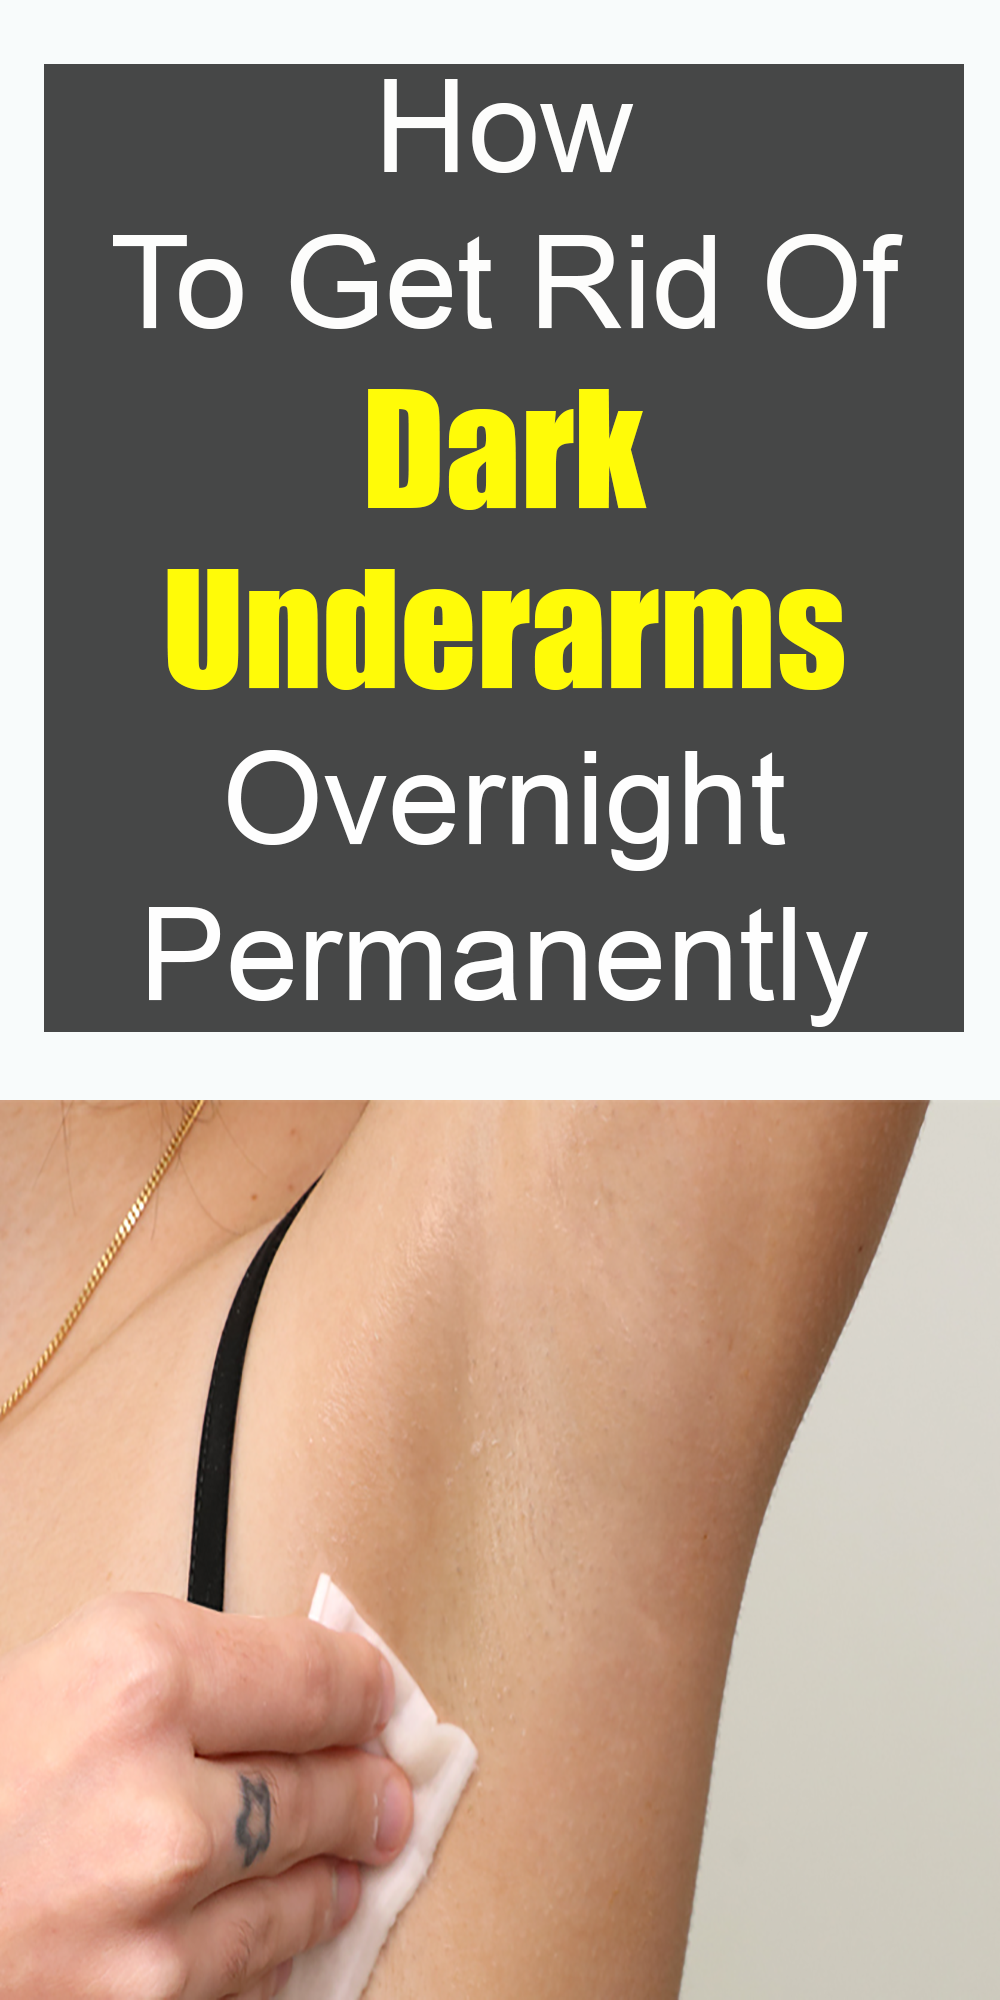 15 how to get rid of dark underarms ideas